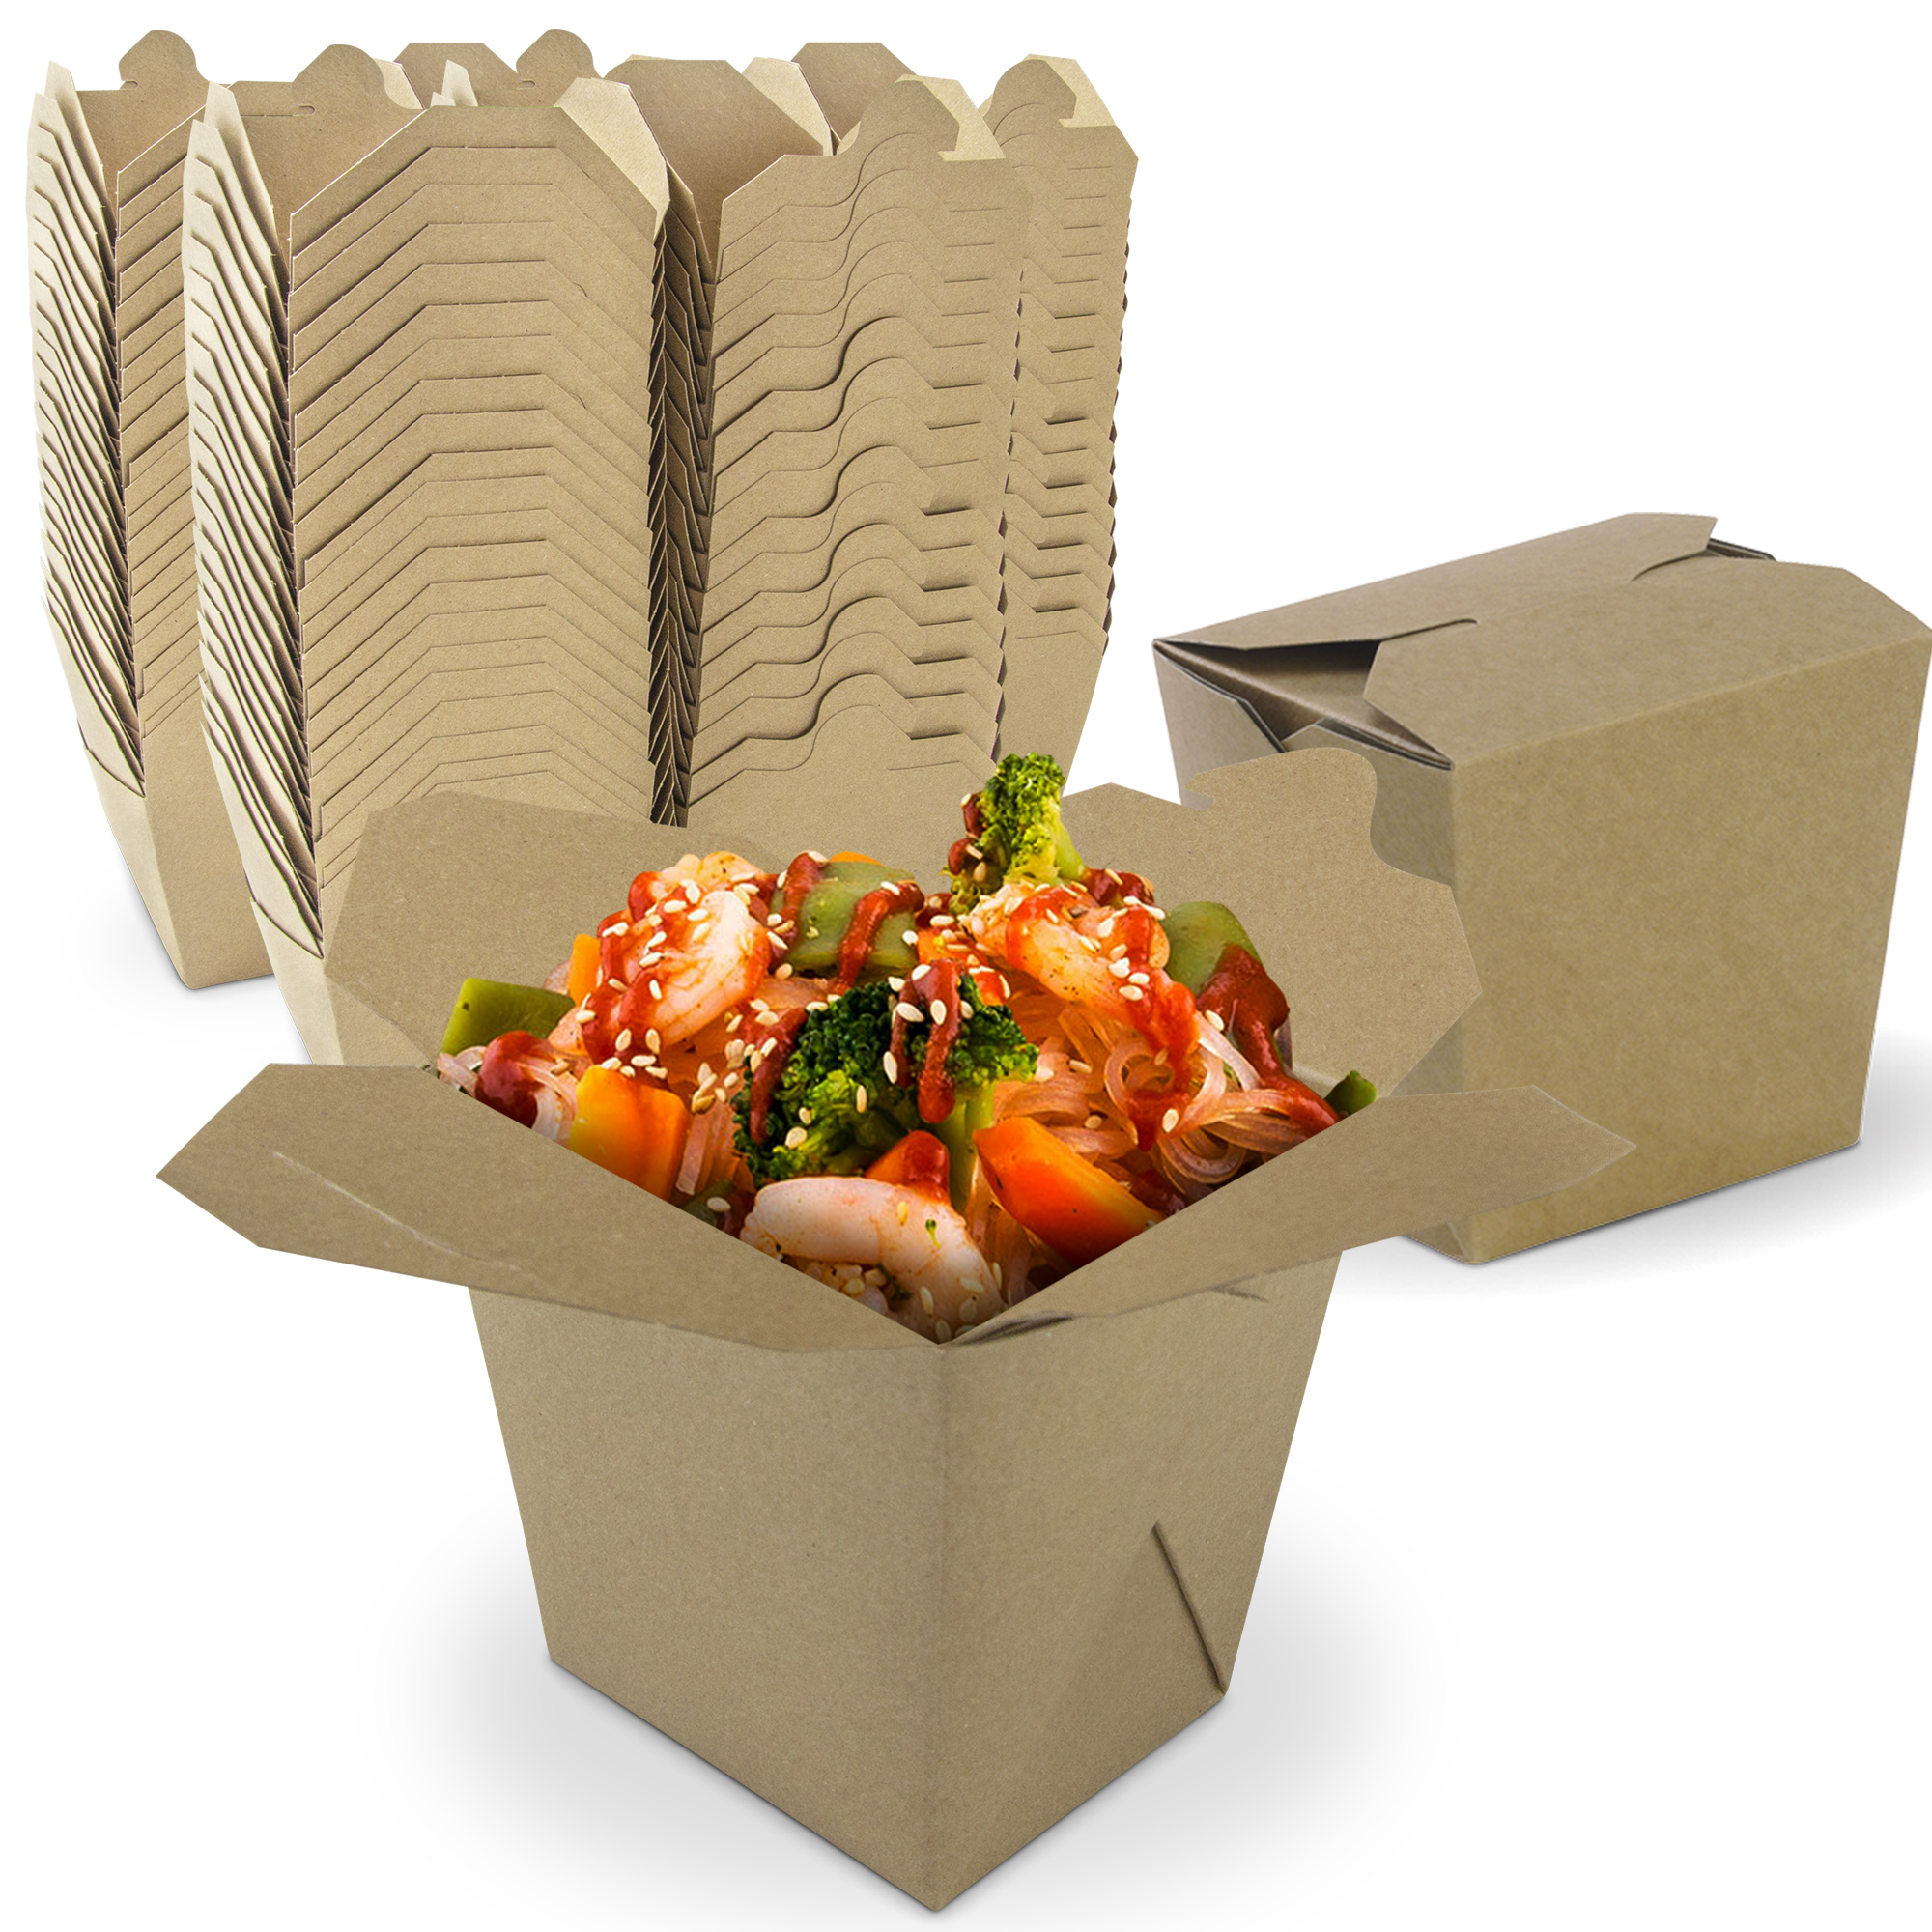 Paper Take-Out Boxes - 26 oz - ULINE - Carton of 450 - S-22405